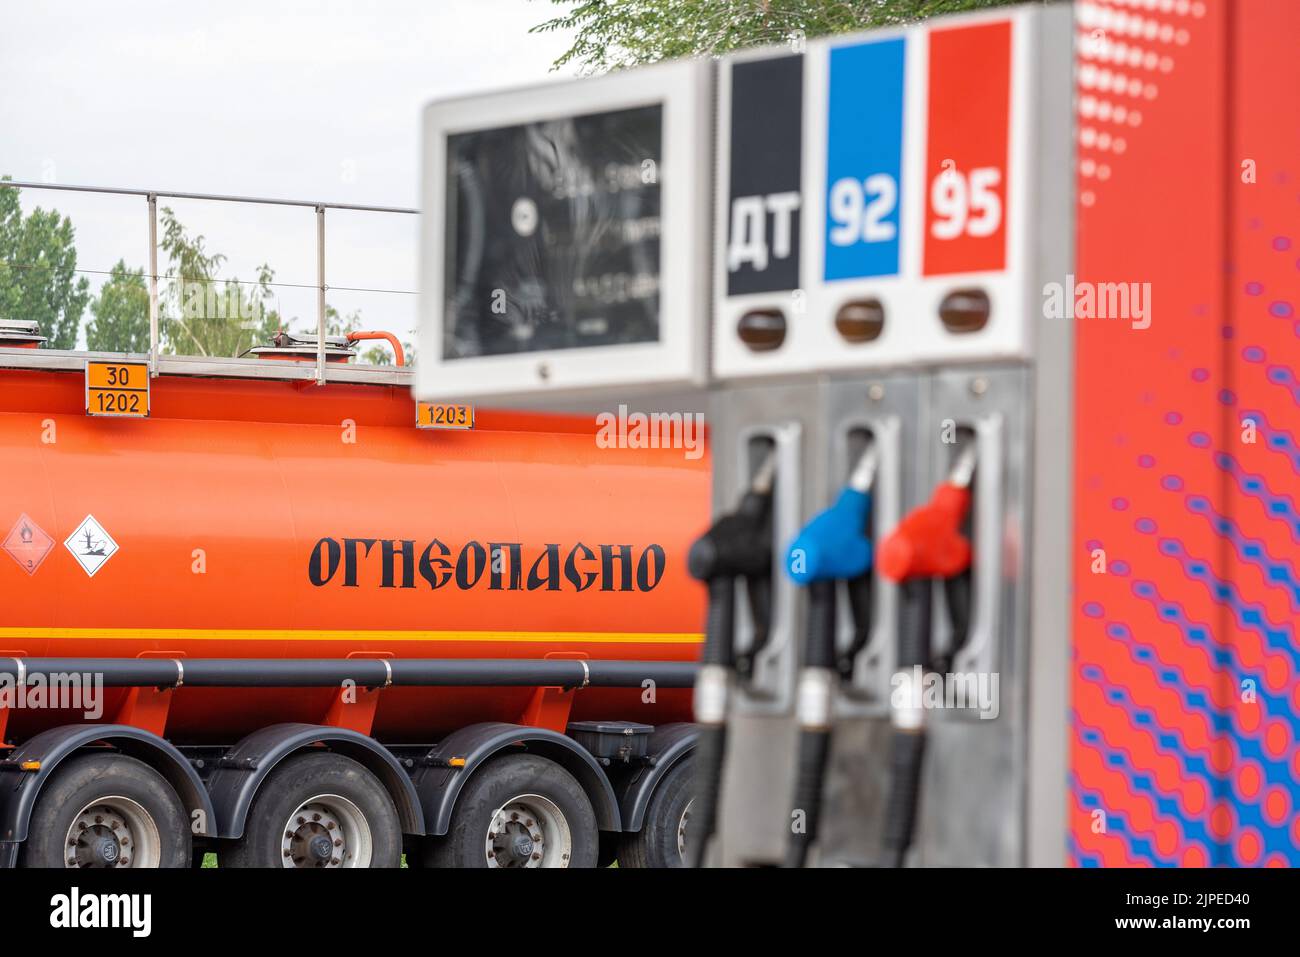 Genre photography. The work of the gas station 'Favorite Fuel Company' (LTK, owner - TradeProject LLC). Column with different grades of gasoline at the gas station. 04.08.2022 Russia, Lipetsk region, Lipetsk Photo credit: Oleg Kharseev/Kommersant/Sipa USA Stock Photo